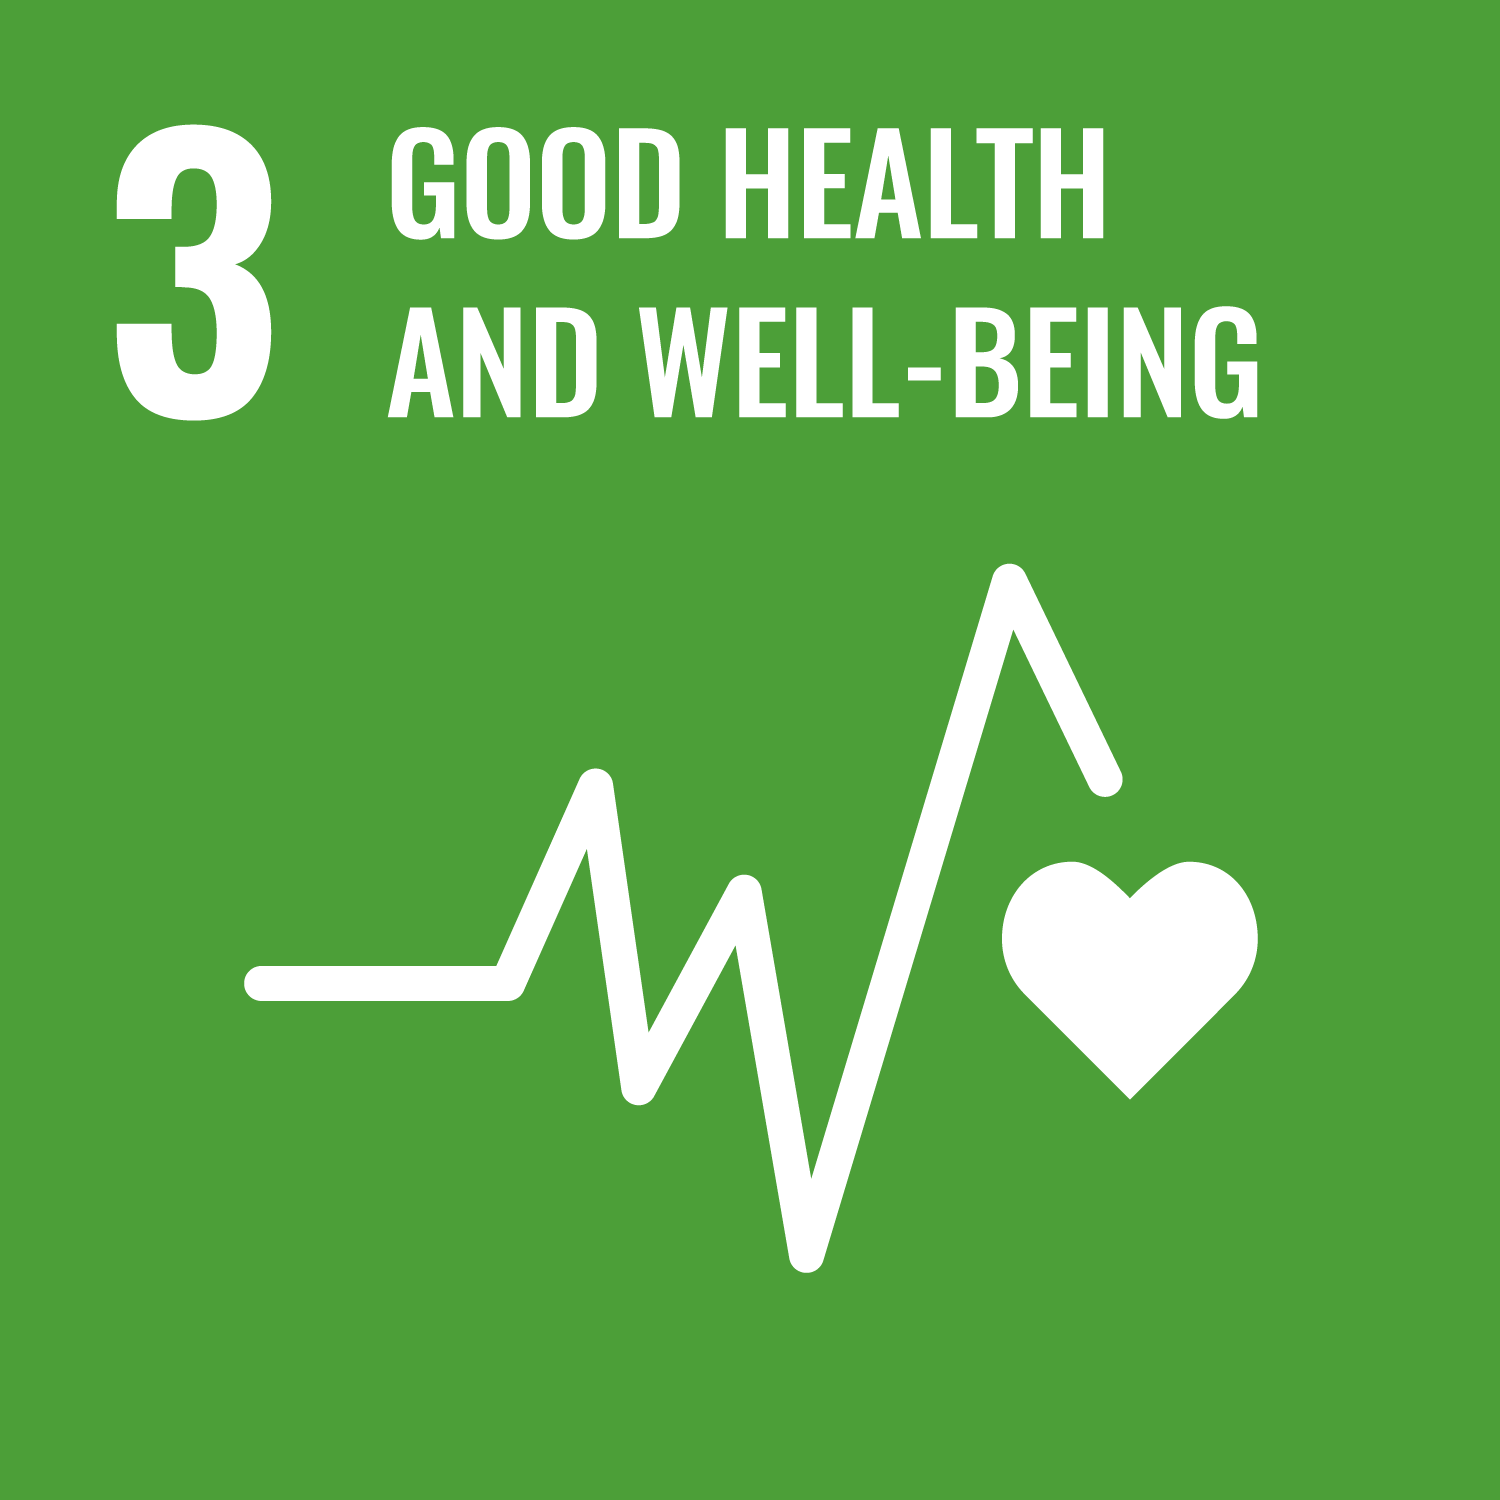 Image of good health and well being goal